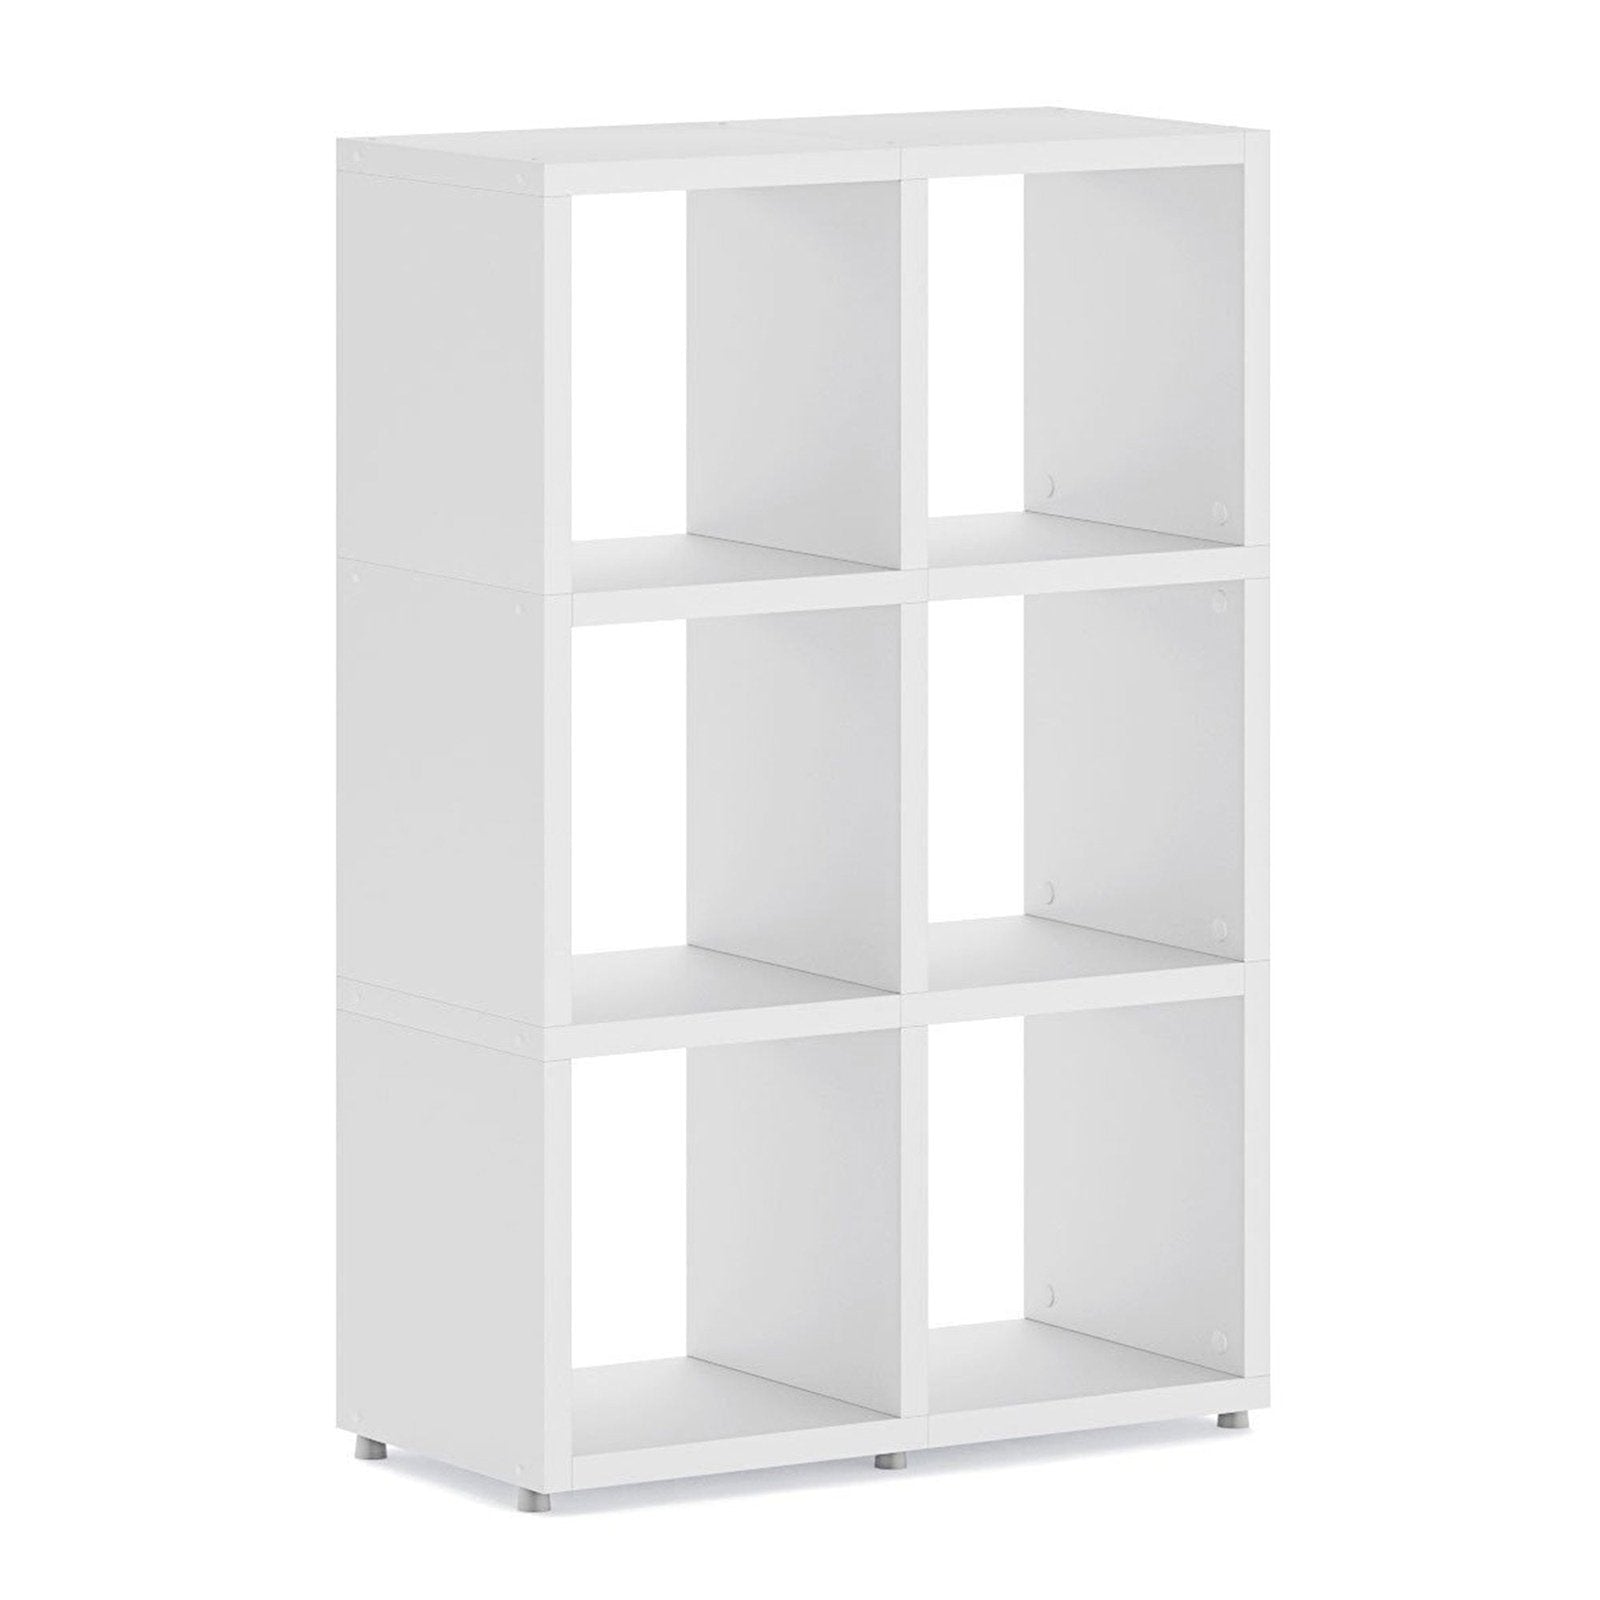 Boon 6x Cube Shelf Storage System - 1120x740x330mm - Office Products Online